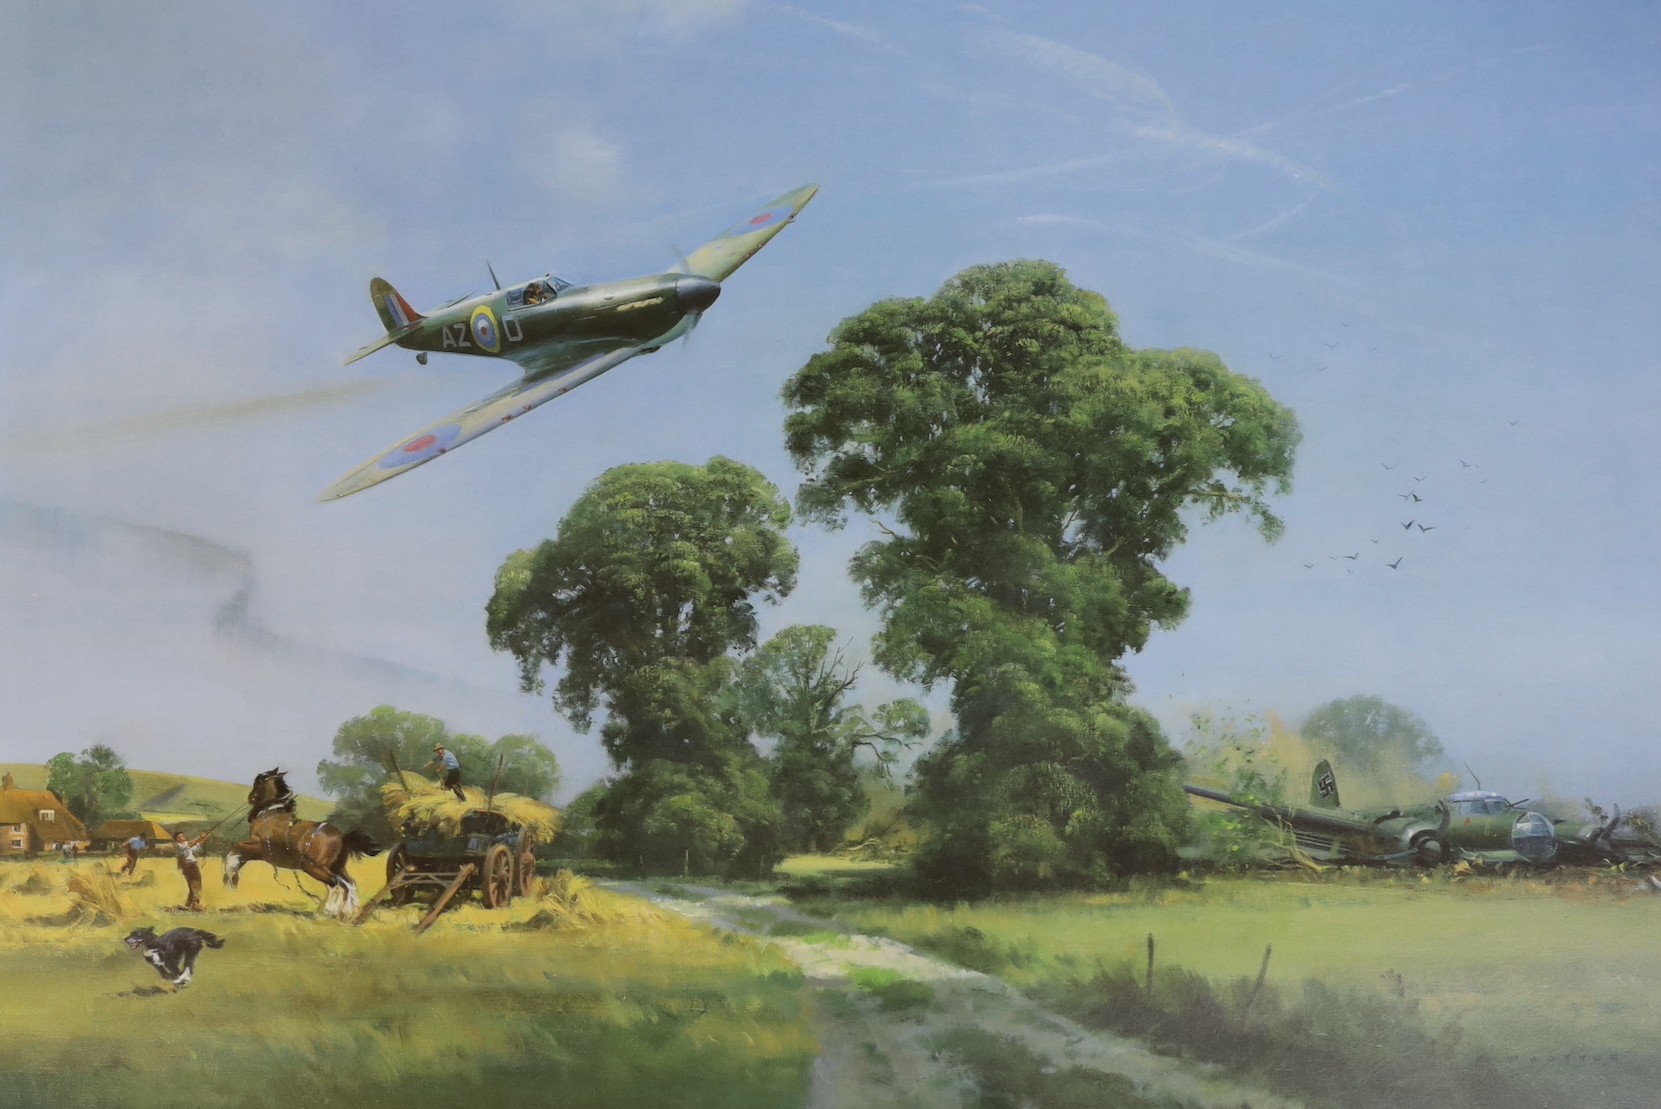 Frank Wooton, three limited edition prints; ‘Steady There, Them’s Spitfires’, 183/630, signed in pencil, 44 x 53cm, ‘Down on the Farm’, 839/1000, signed in pencil, 58 x 74cm, and ‘Under the Downs’, 22/850, signed in penc